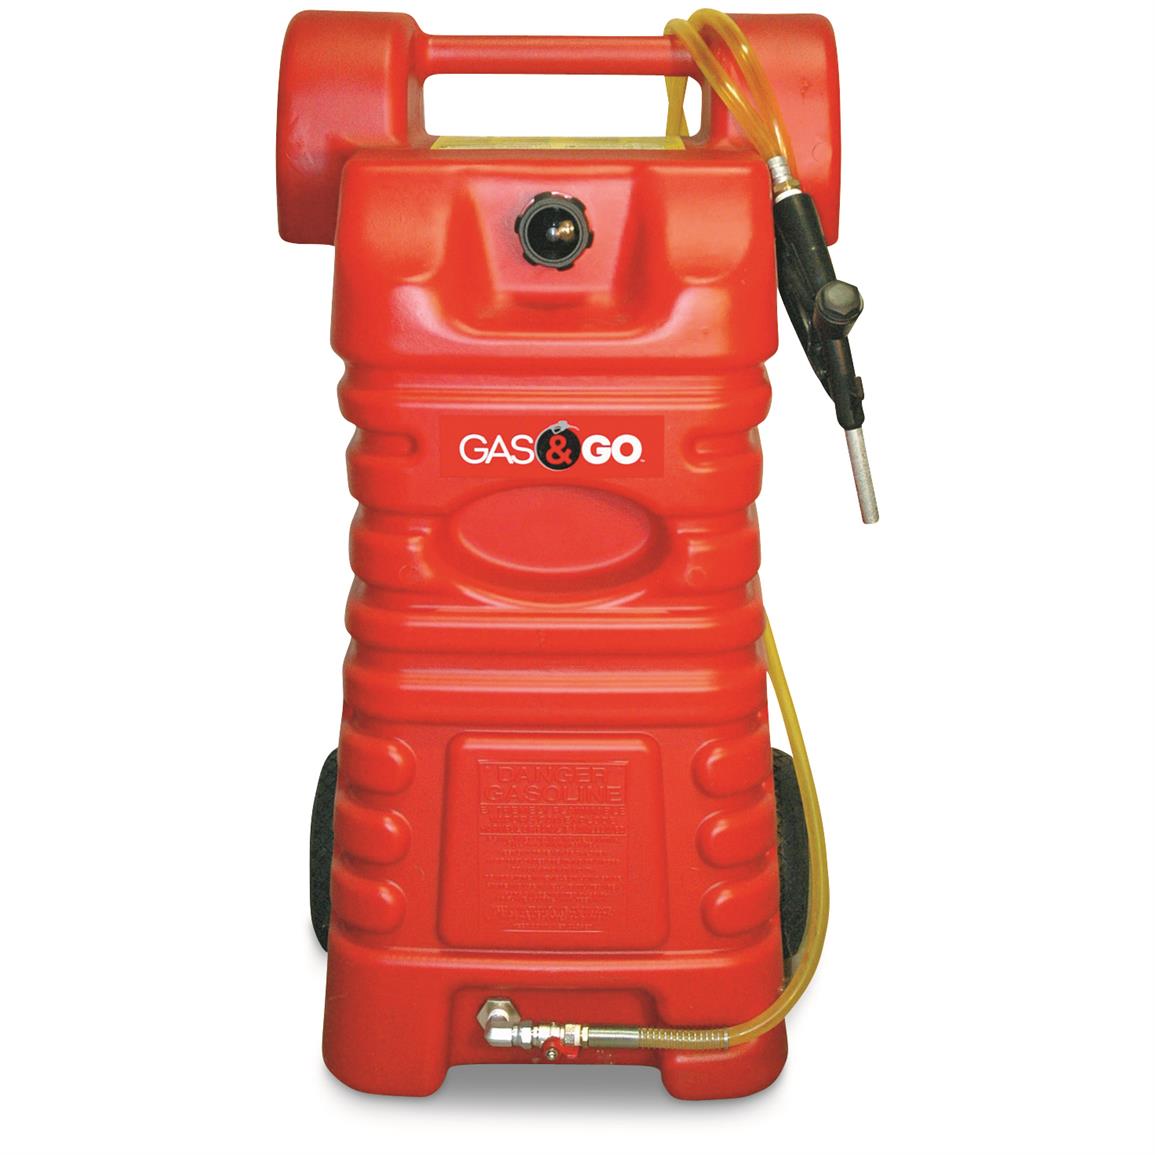 SUNCOO 30 Gallon Portable Gas Tank Diesel Fuel Caddy Storage Containers Pump & Hose Tube Red 